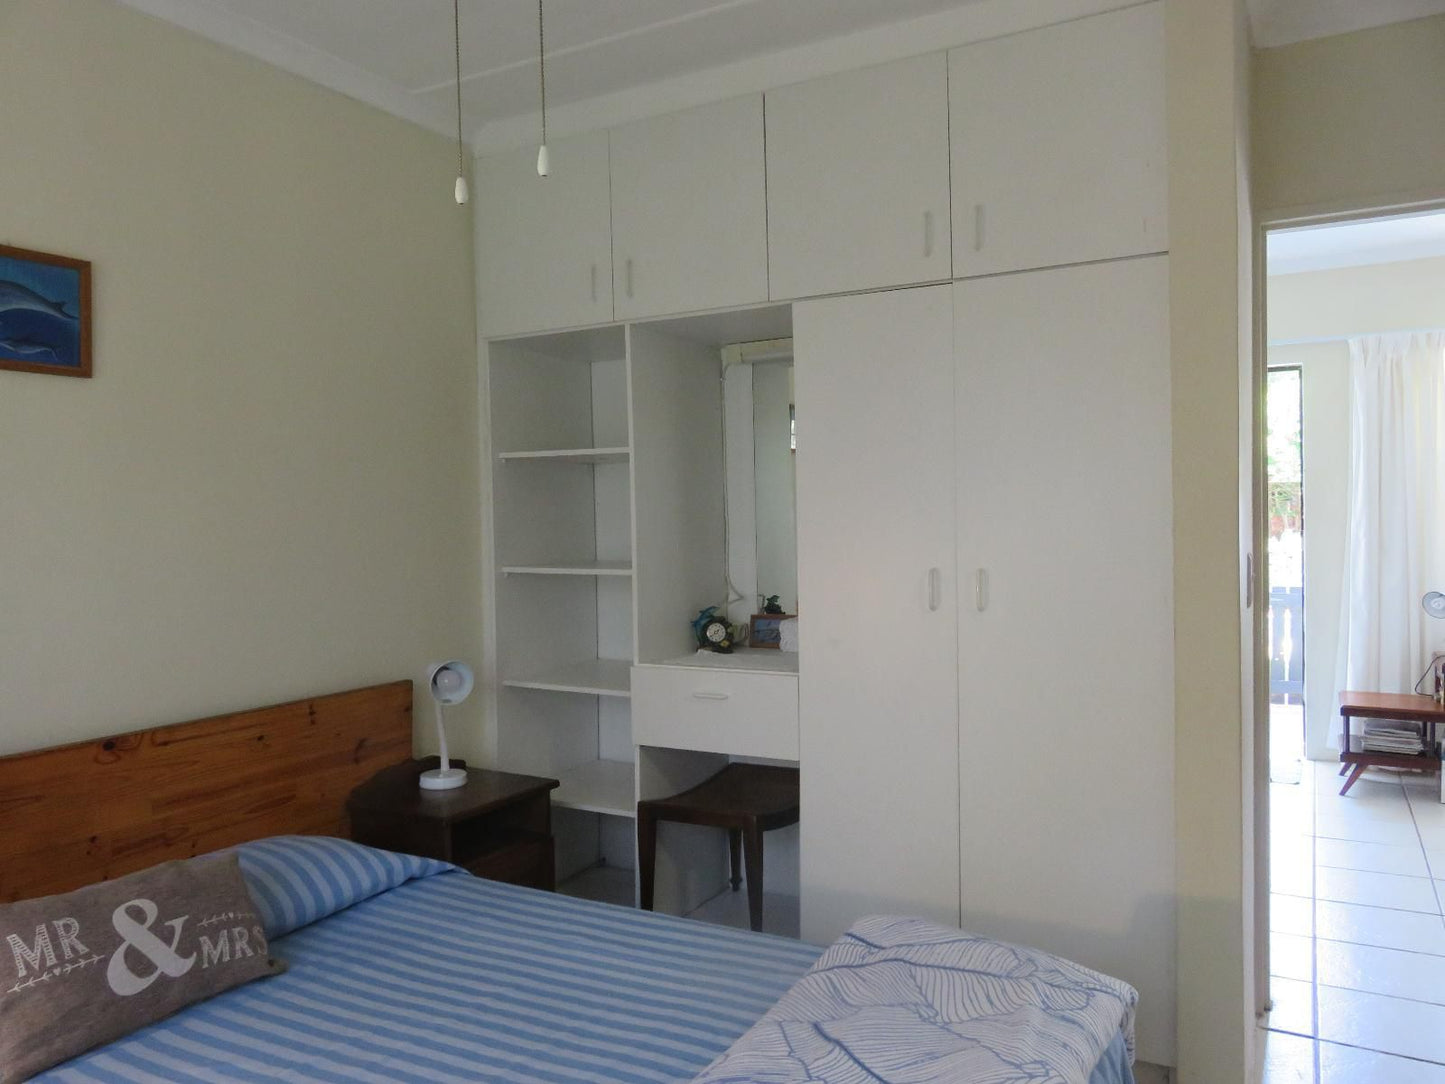 40 Winks Accommodation Somerset West Western Cape South Africa Unsaturated